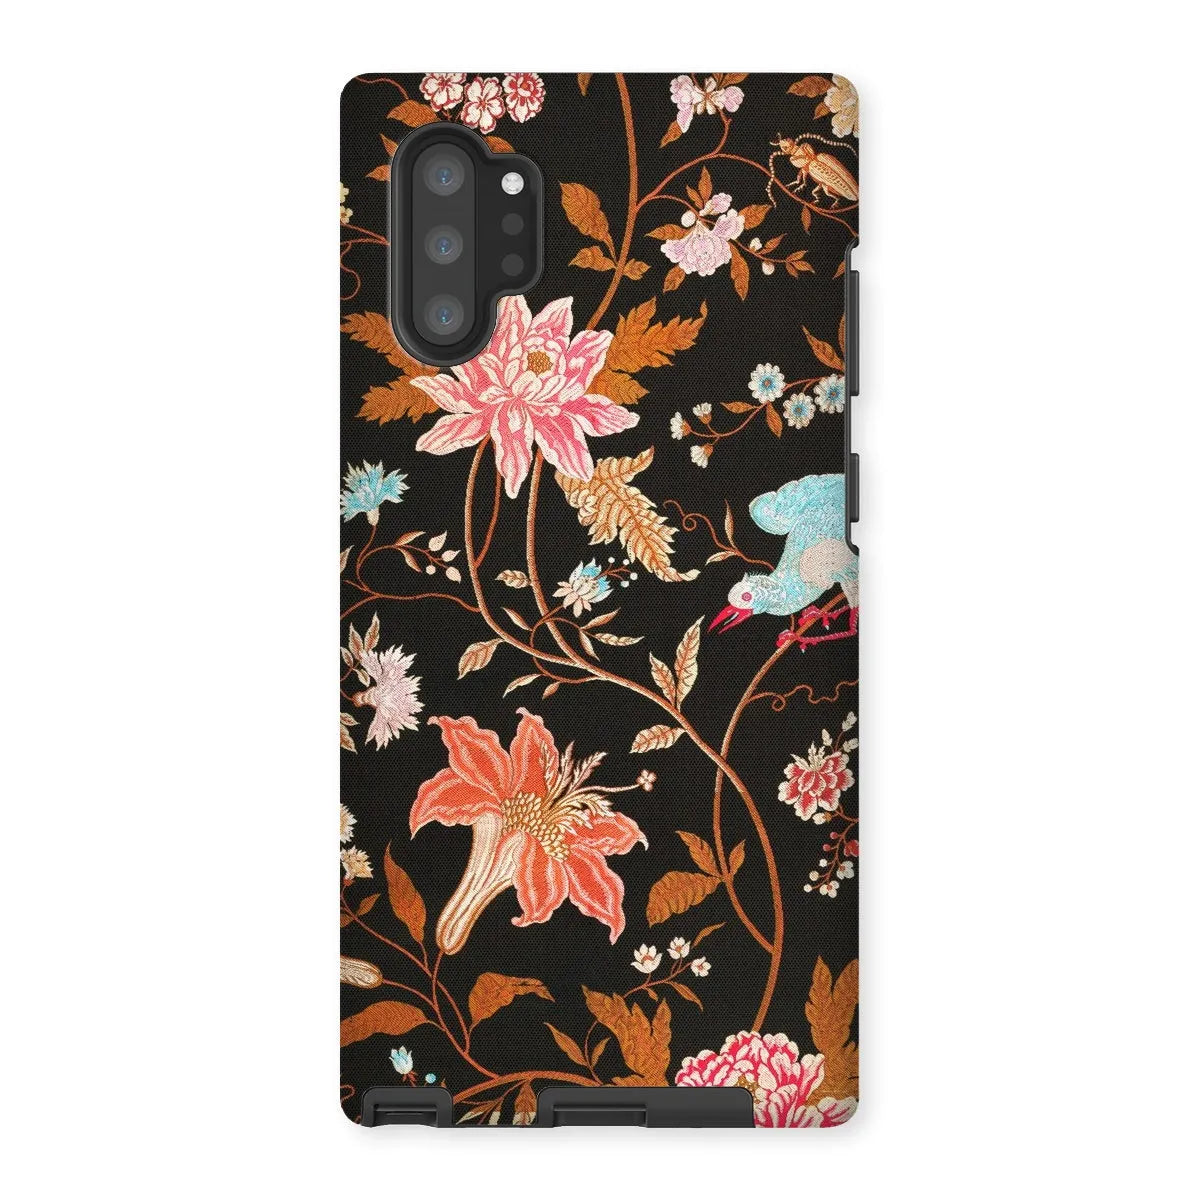 Midnight Call - Indian Aesthetic Fabric Art Phone Case - Samsung Galaxy Note 10p / Matte - Mobile Phone Cases